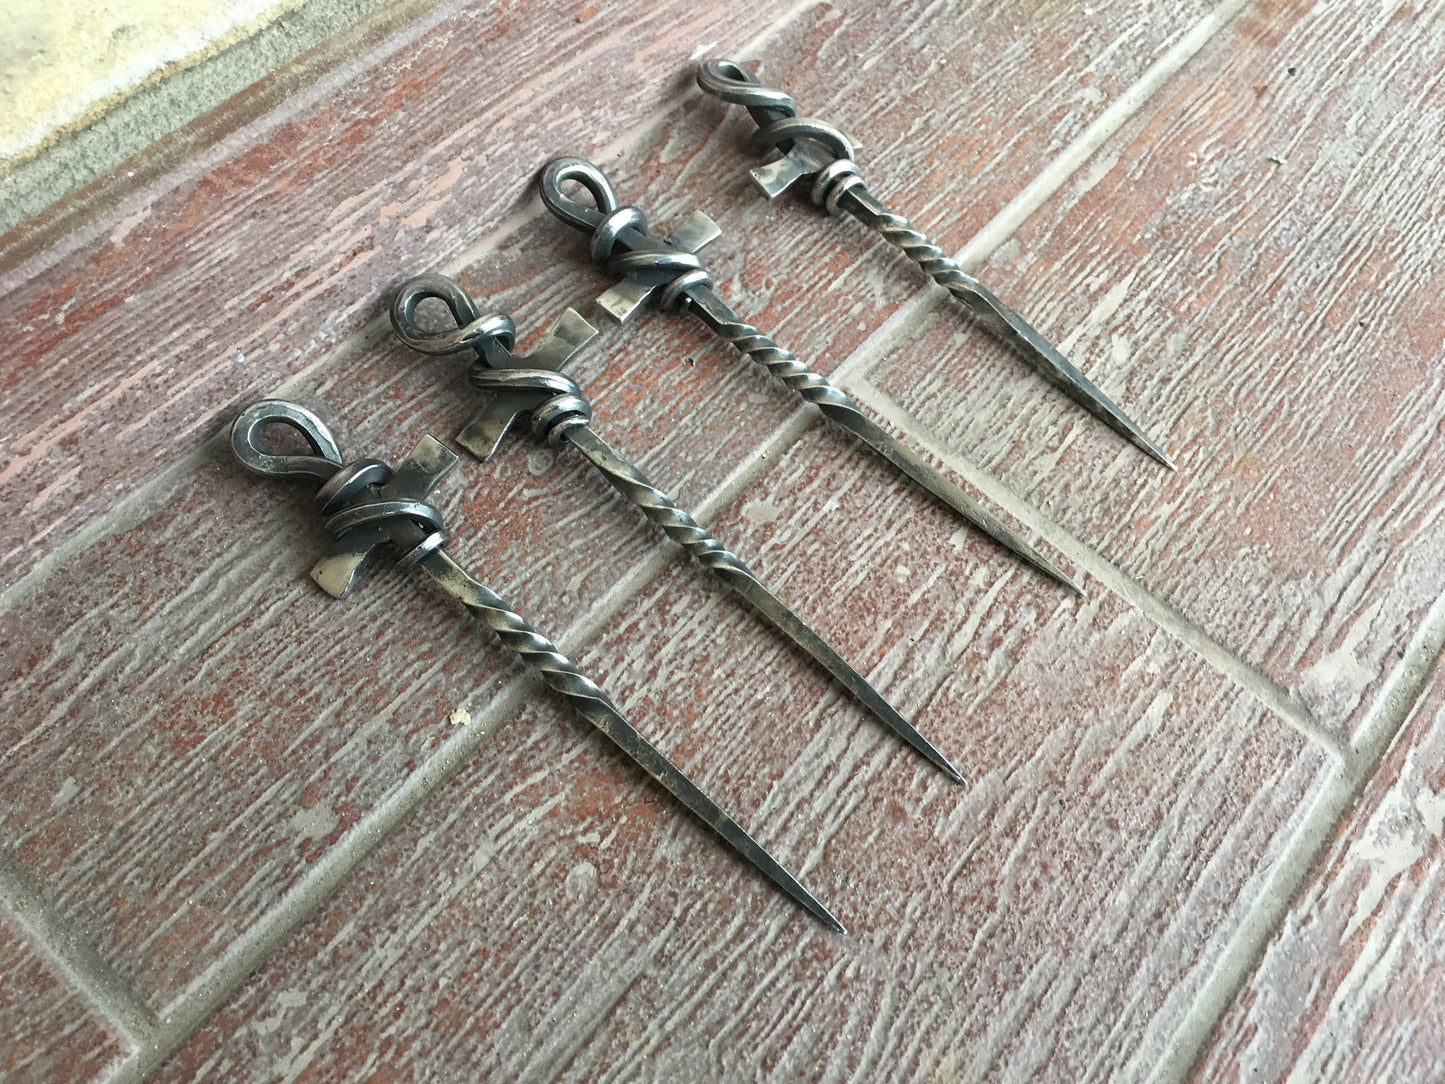 Stainless steel skewers. ankh, food prickers, ankh, ankh skewer, BBQ, grilling itensils, stainless steel gift, ankh jewelry, kitchen gift